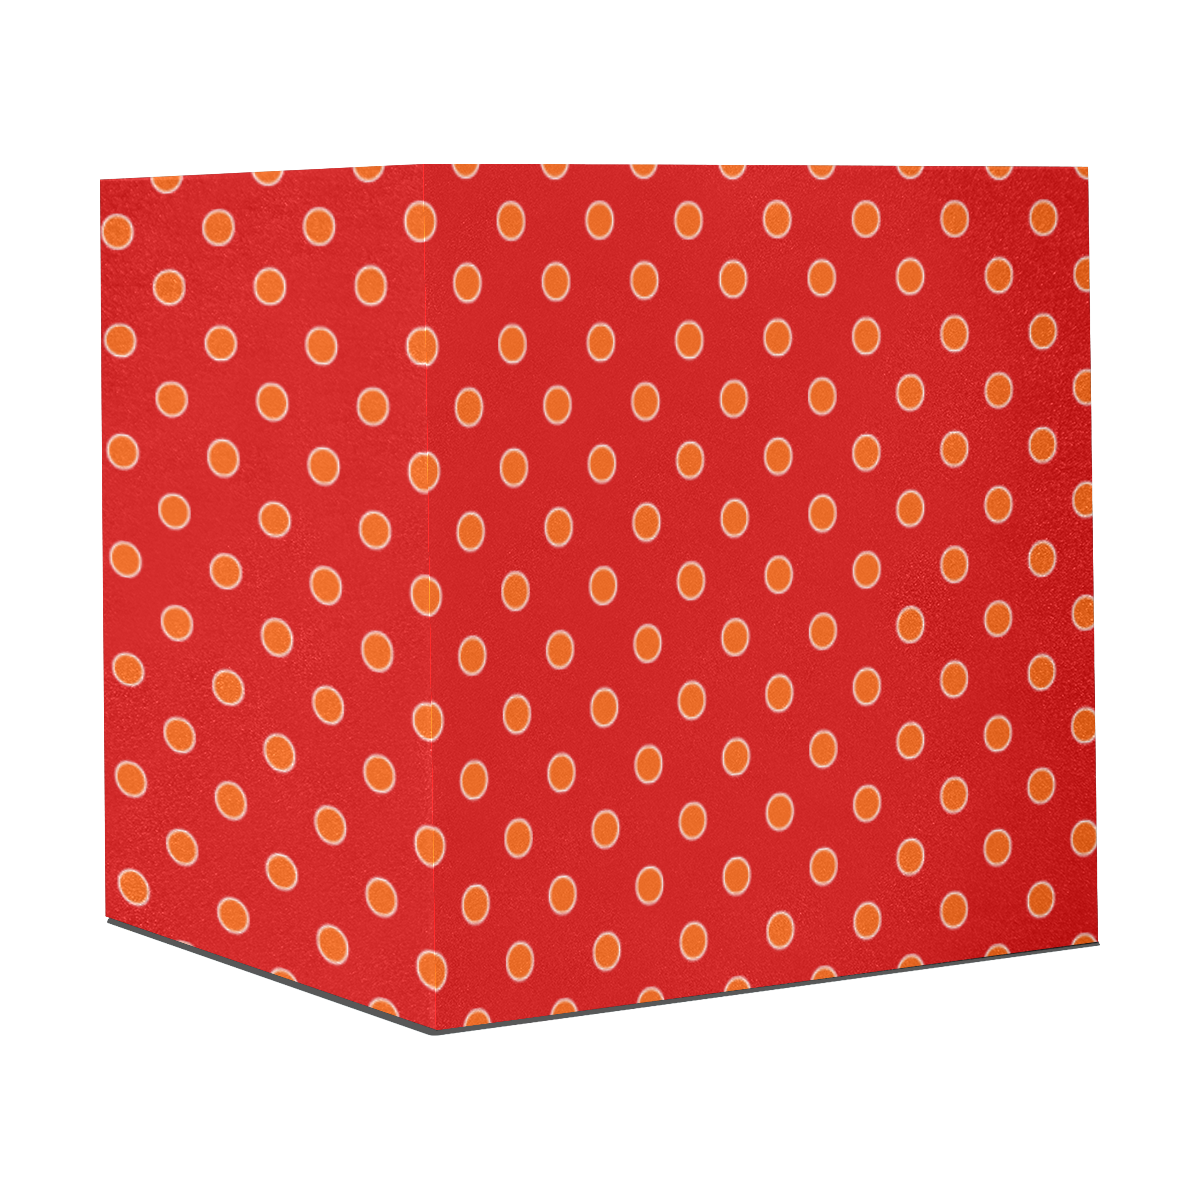 Orange Tangerine Polka Dots on Red Gift Wrapping Paper 58"x 23" (5 Rolls)